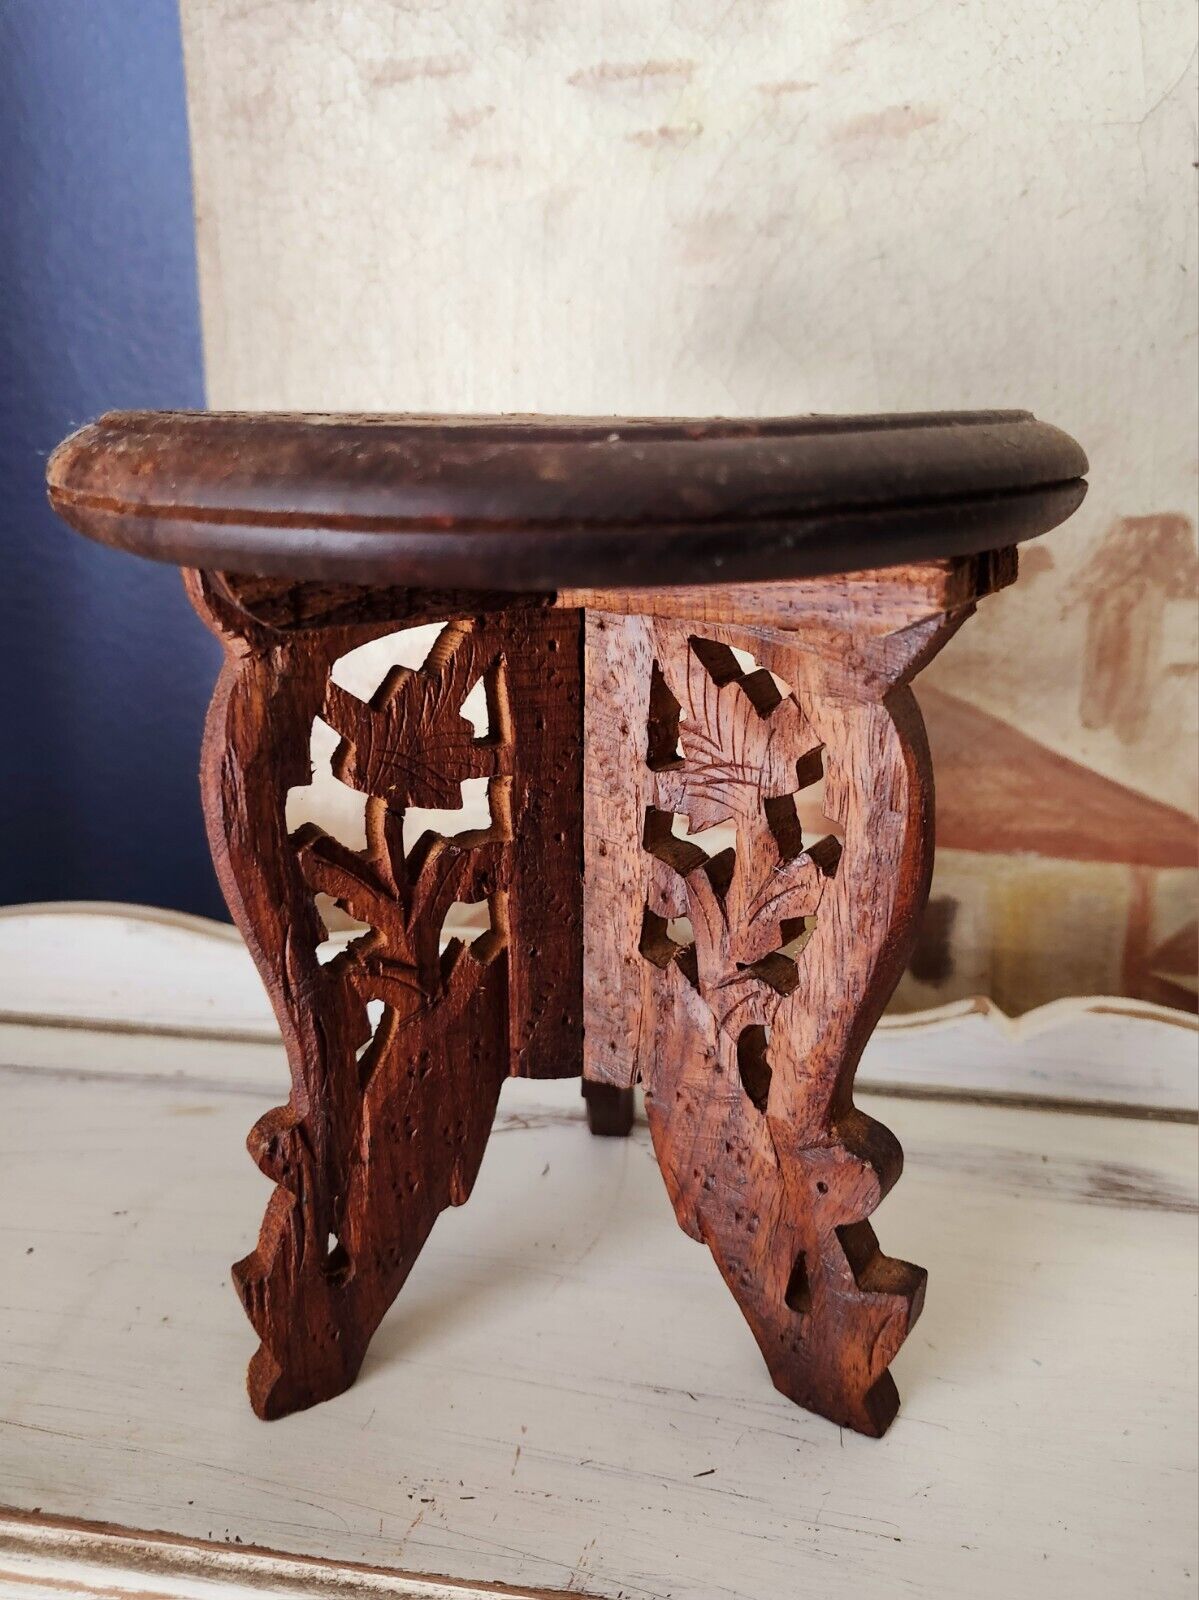 Vintage India Teak Wood Stand 7 Inch Diameter By 7.5 Inches Tall With Inlay...